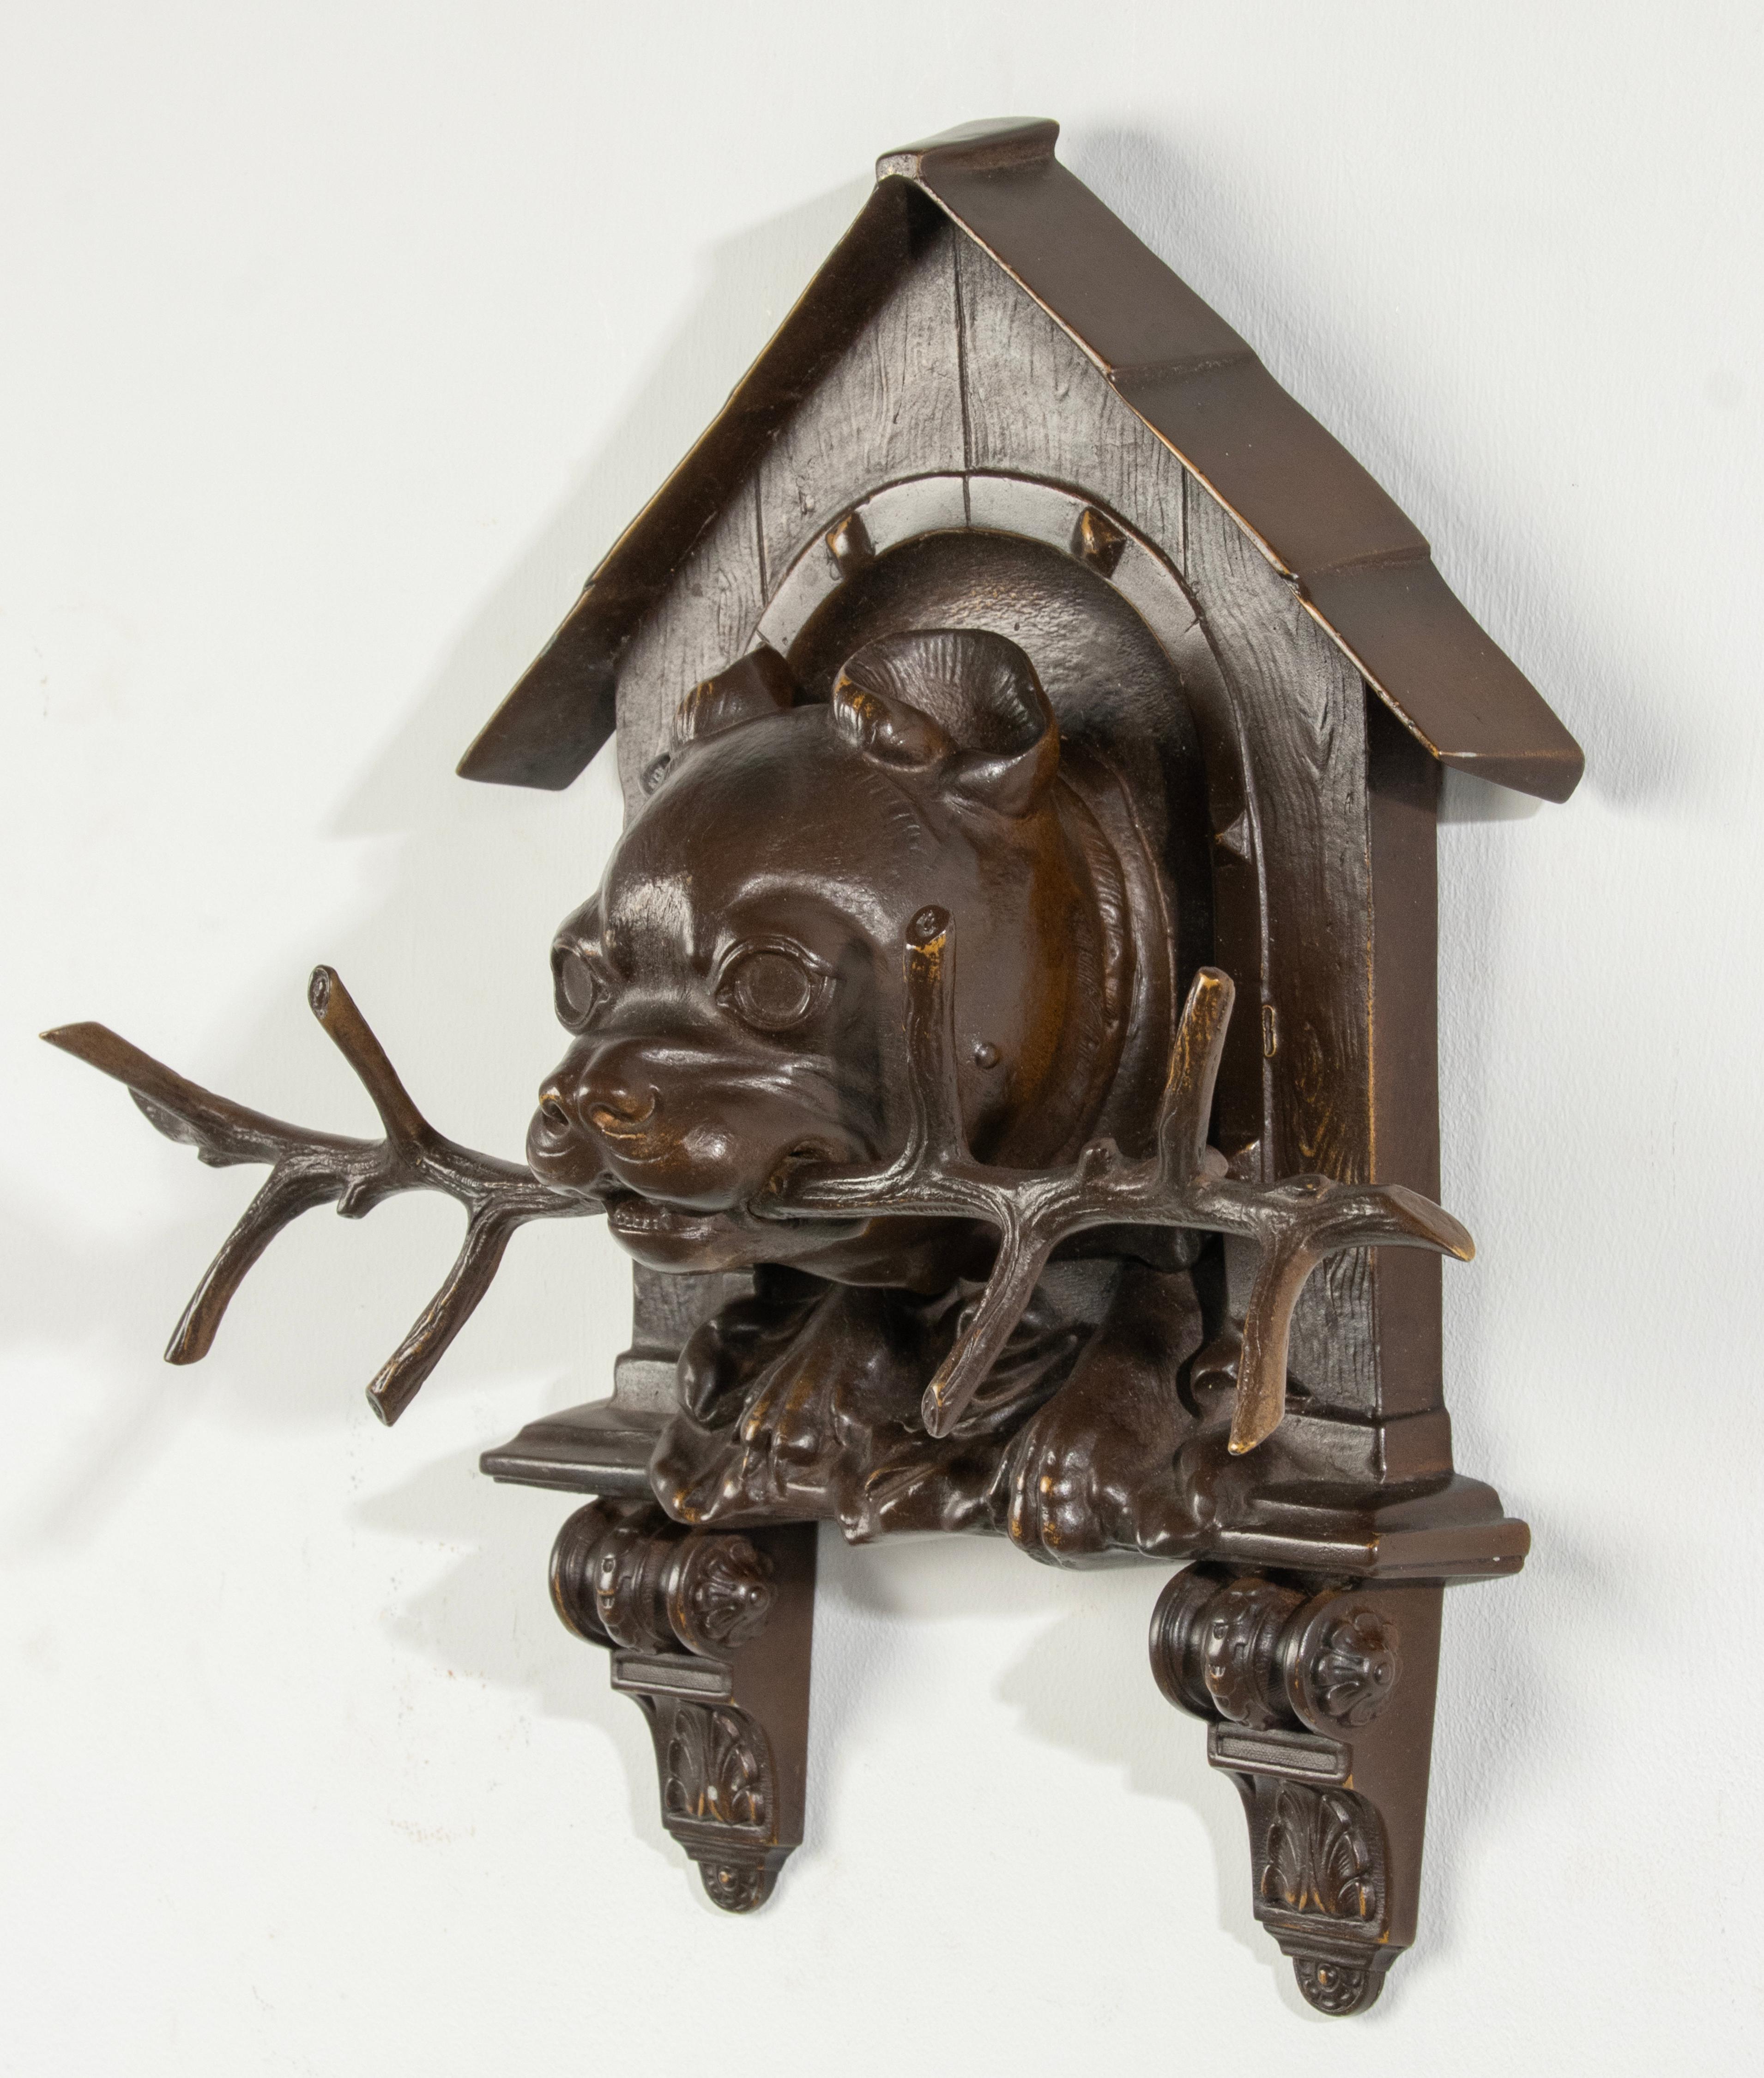 A refined wall sculpture of a Bulldog coming out of a doghouse with a branch in its mouth. Made of brown patinated bronze. With refined casting details such as the wood grain of the wooden doghouse. Made in Germany in Black Forest style, circa